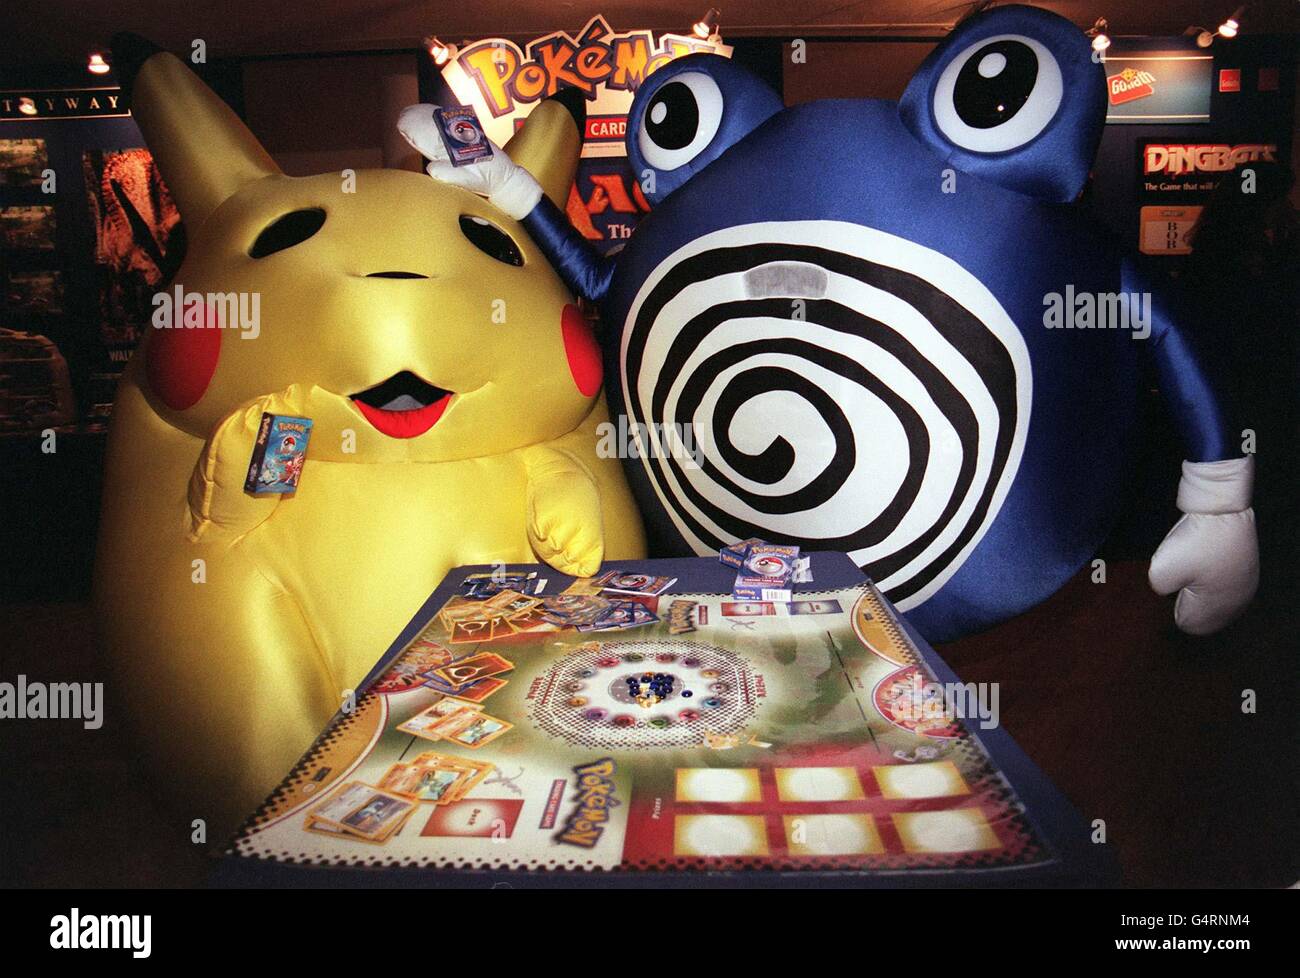 Characters from the Pokemon Trading Card Game, Paly, play the game during  Toy 99, in London. 24/04/00: The demand for Pokemon merchandise has turned  it into a multi-million pound industry and is